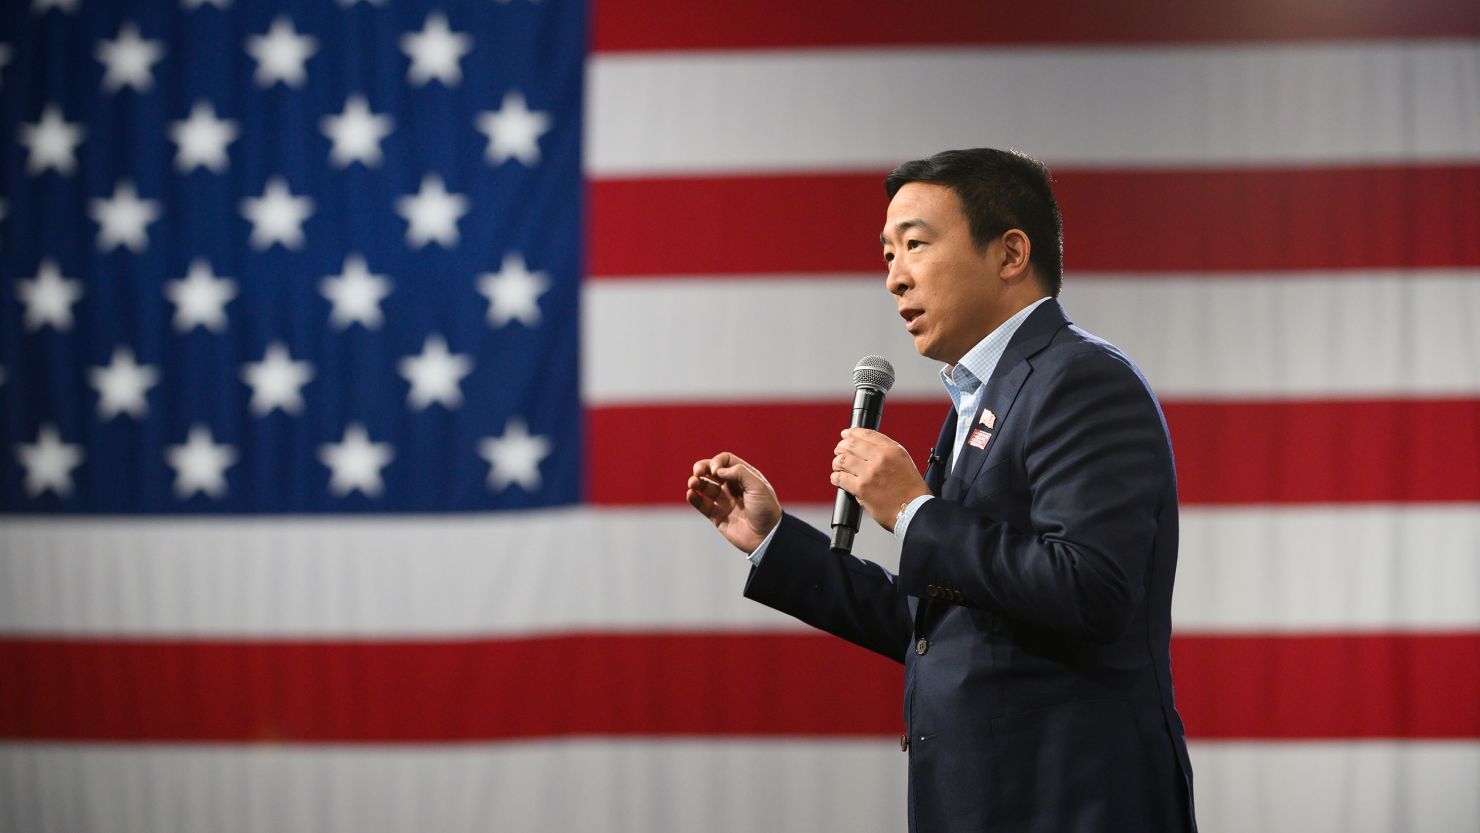 In this August 10, 2019, file photo, Democratic presidential candidate Andrew Yang speaks during a forum on gun safety at the Iowa Events Center on  in Des Moines, Iowa. 